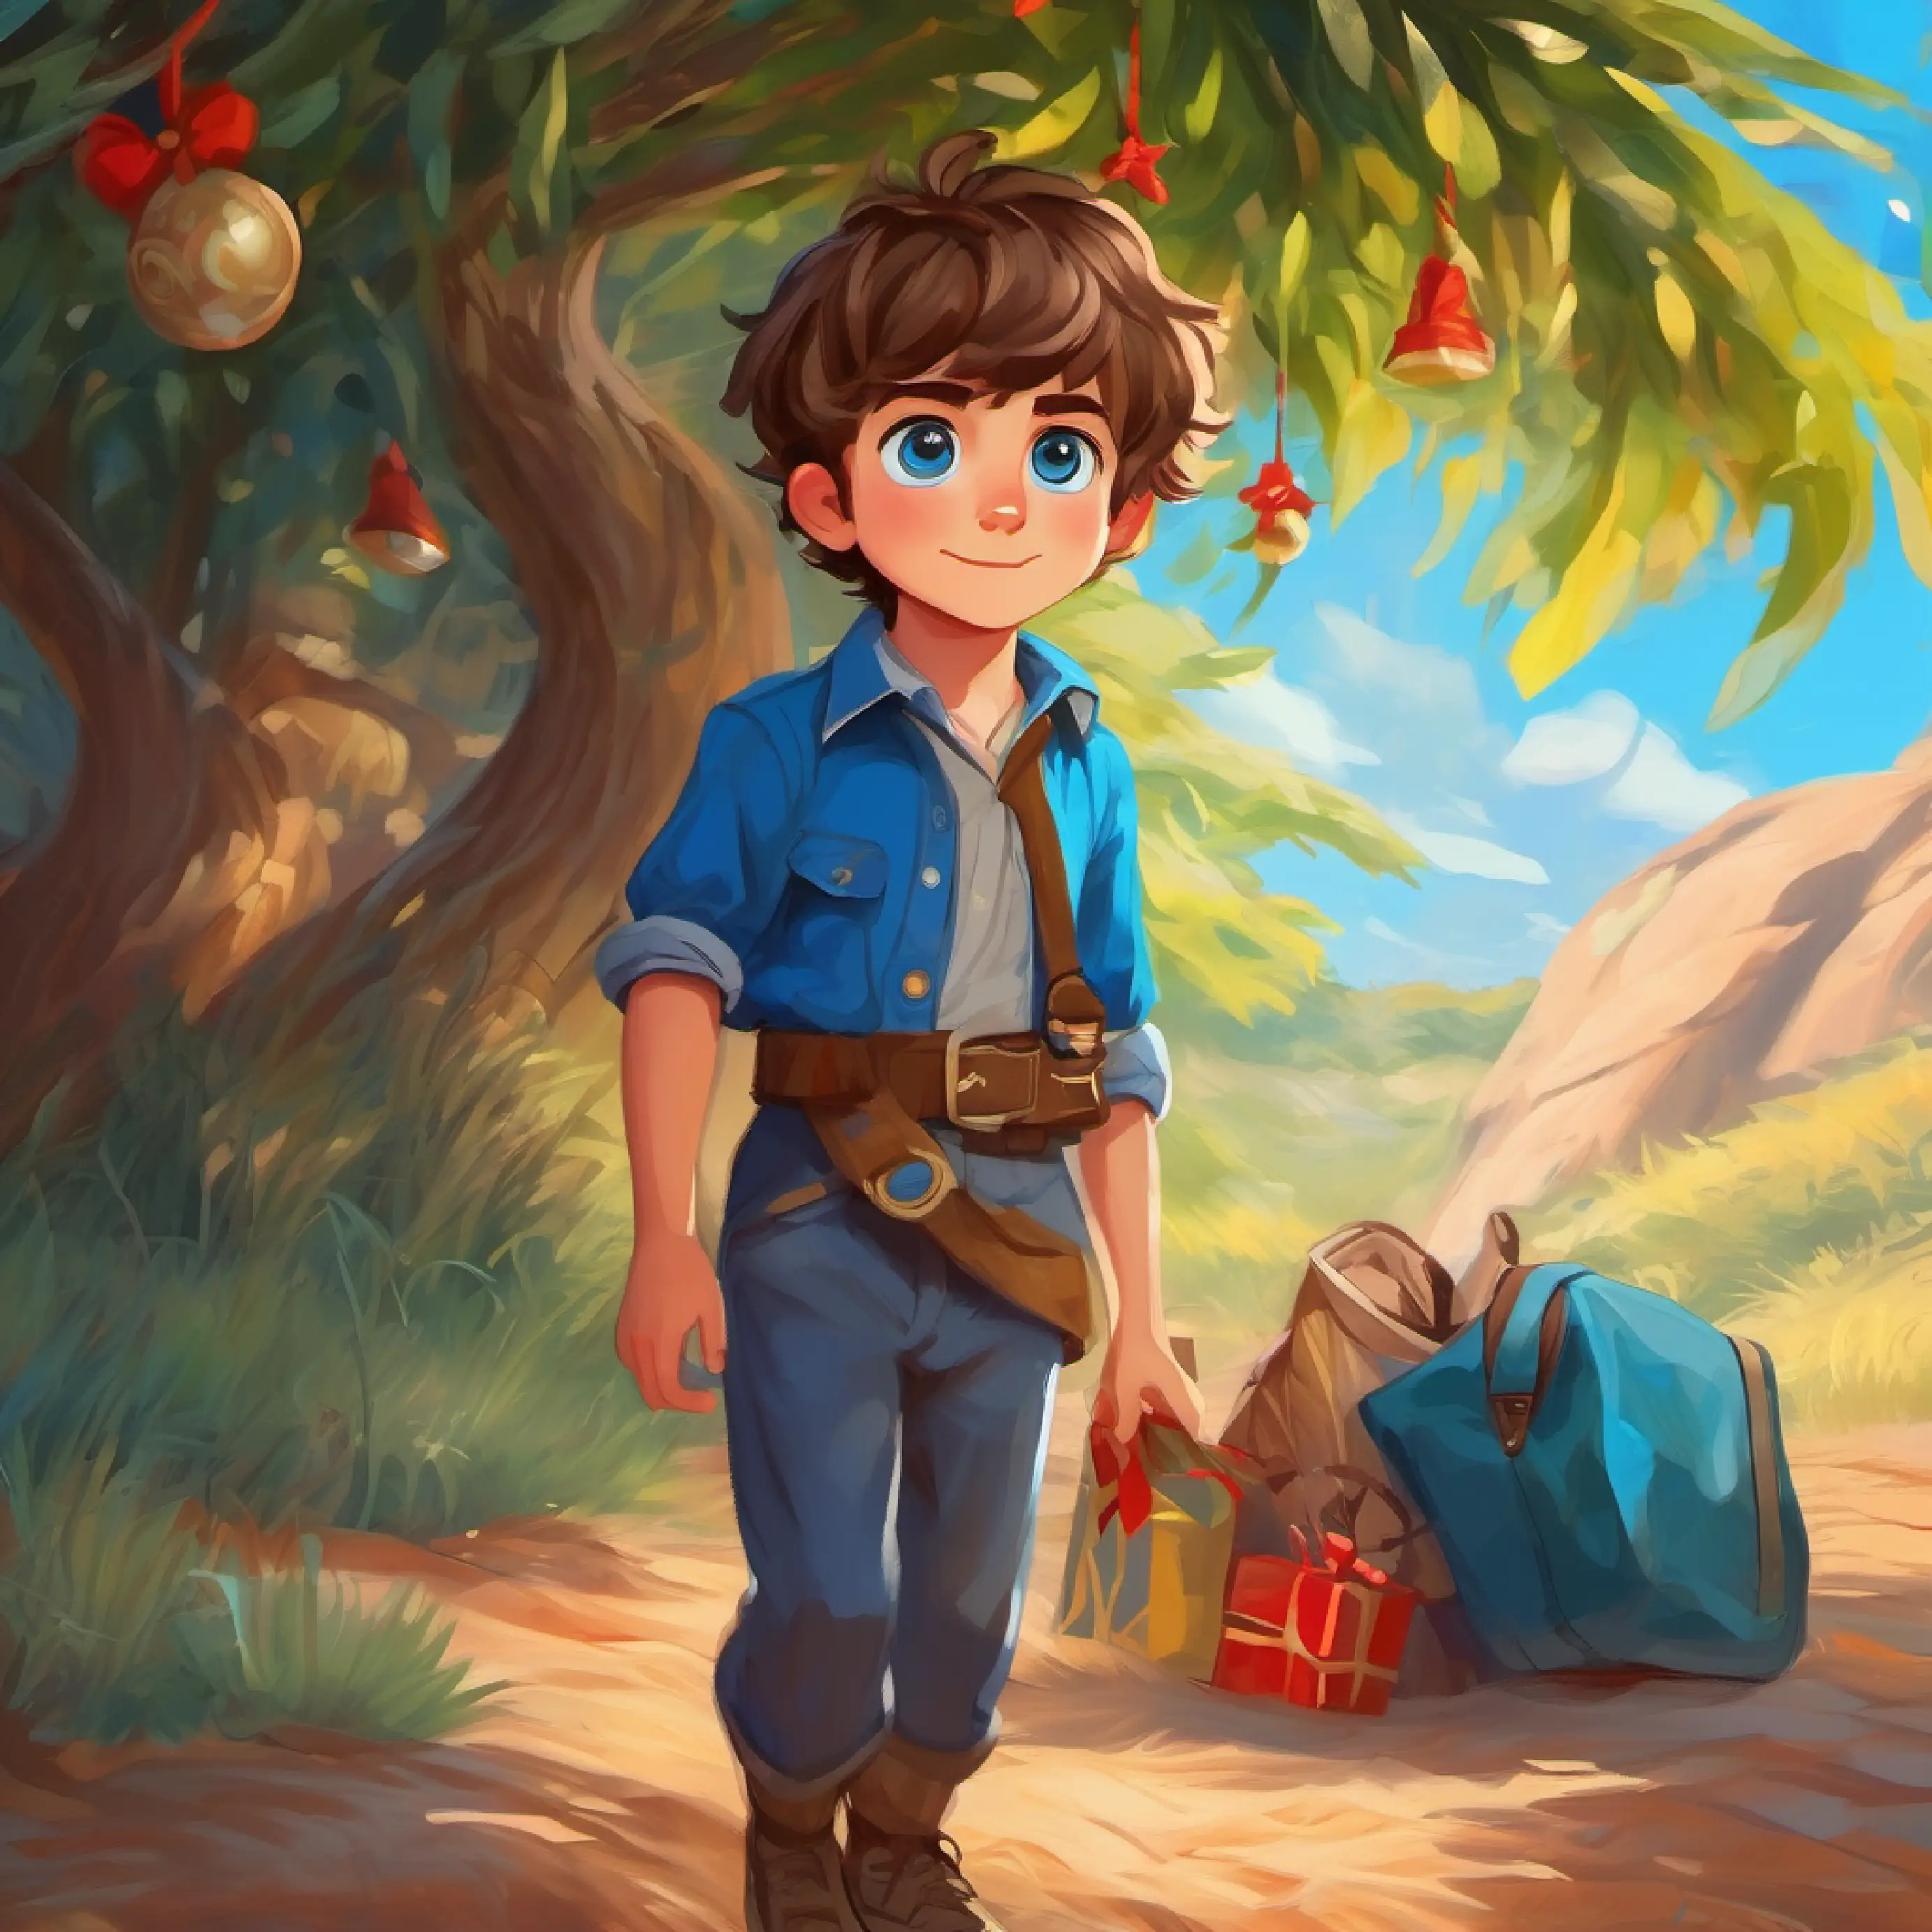 Coping with drought, A curious, adventurous boy with brown hair and blue eyes's conservation efforts